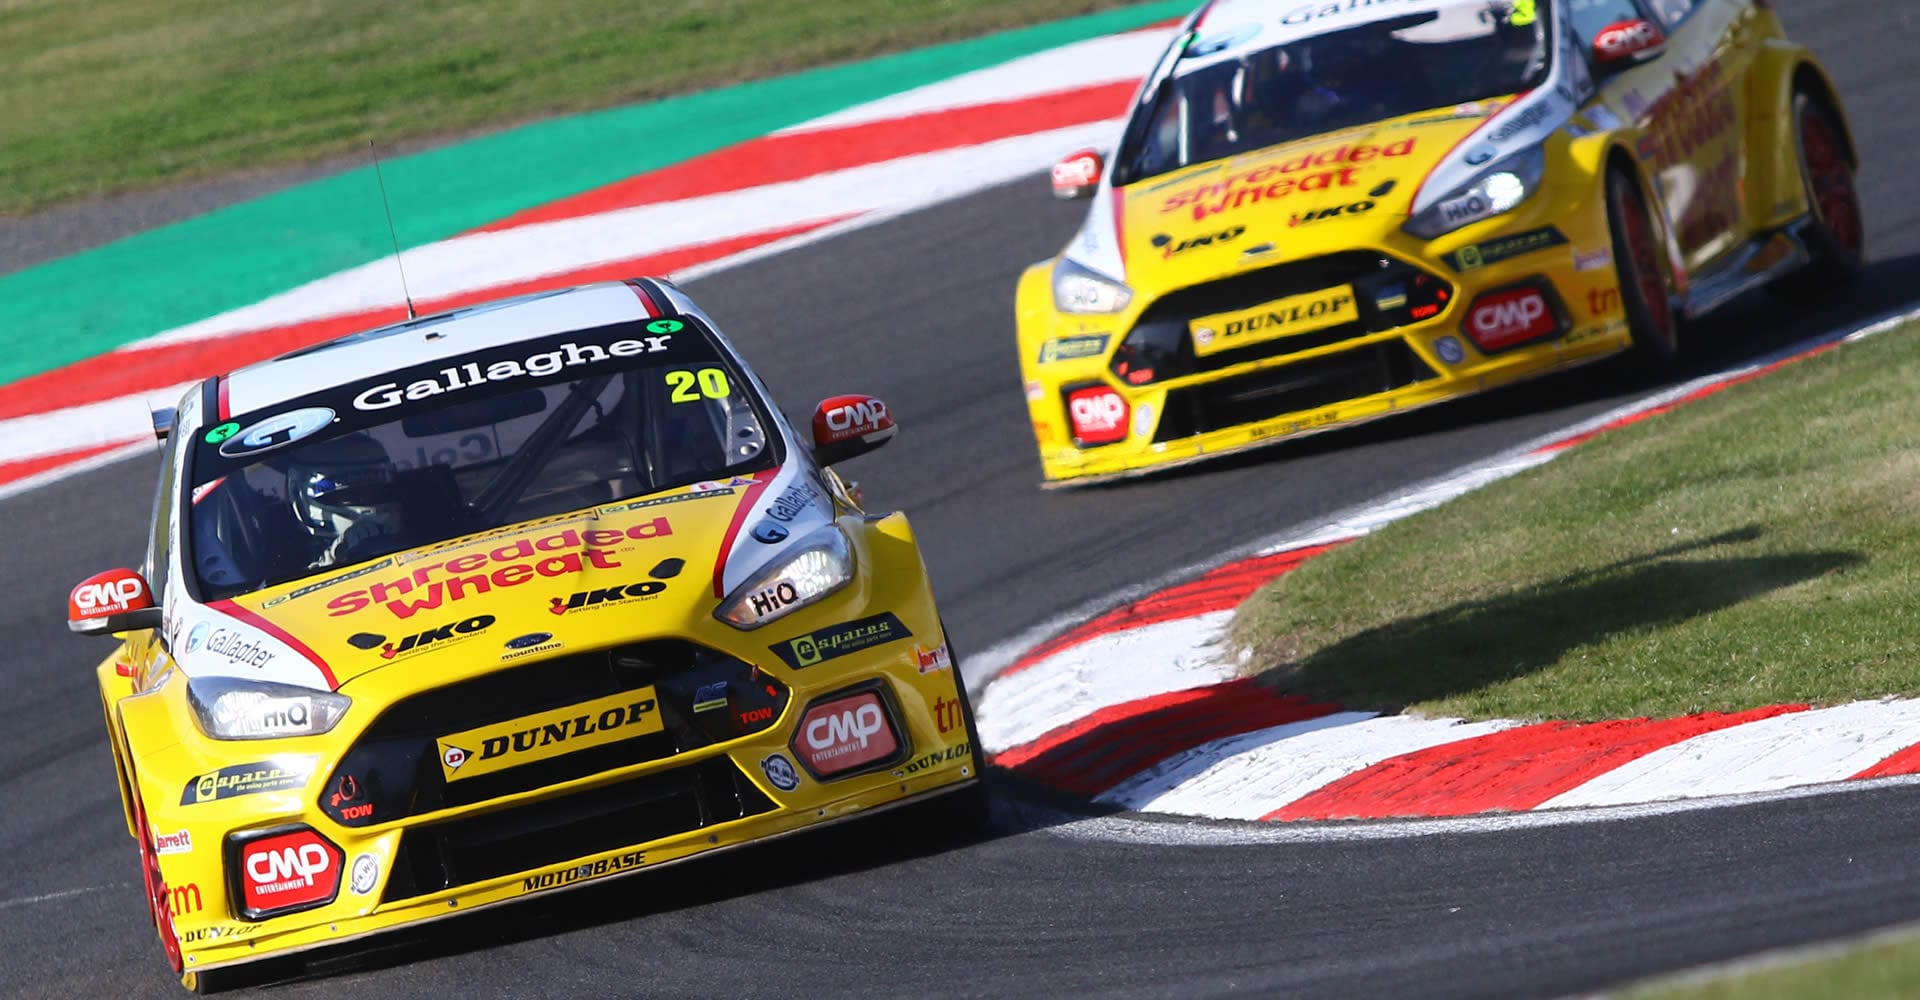 Team Shredded Wheat Racing with Gallagher signs-off in style at Brands Hatch season finale Oct 2018